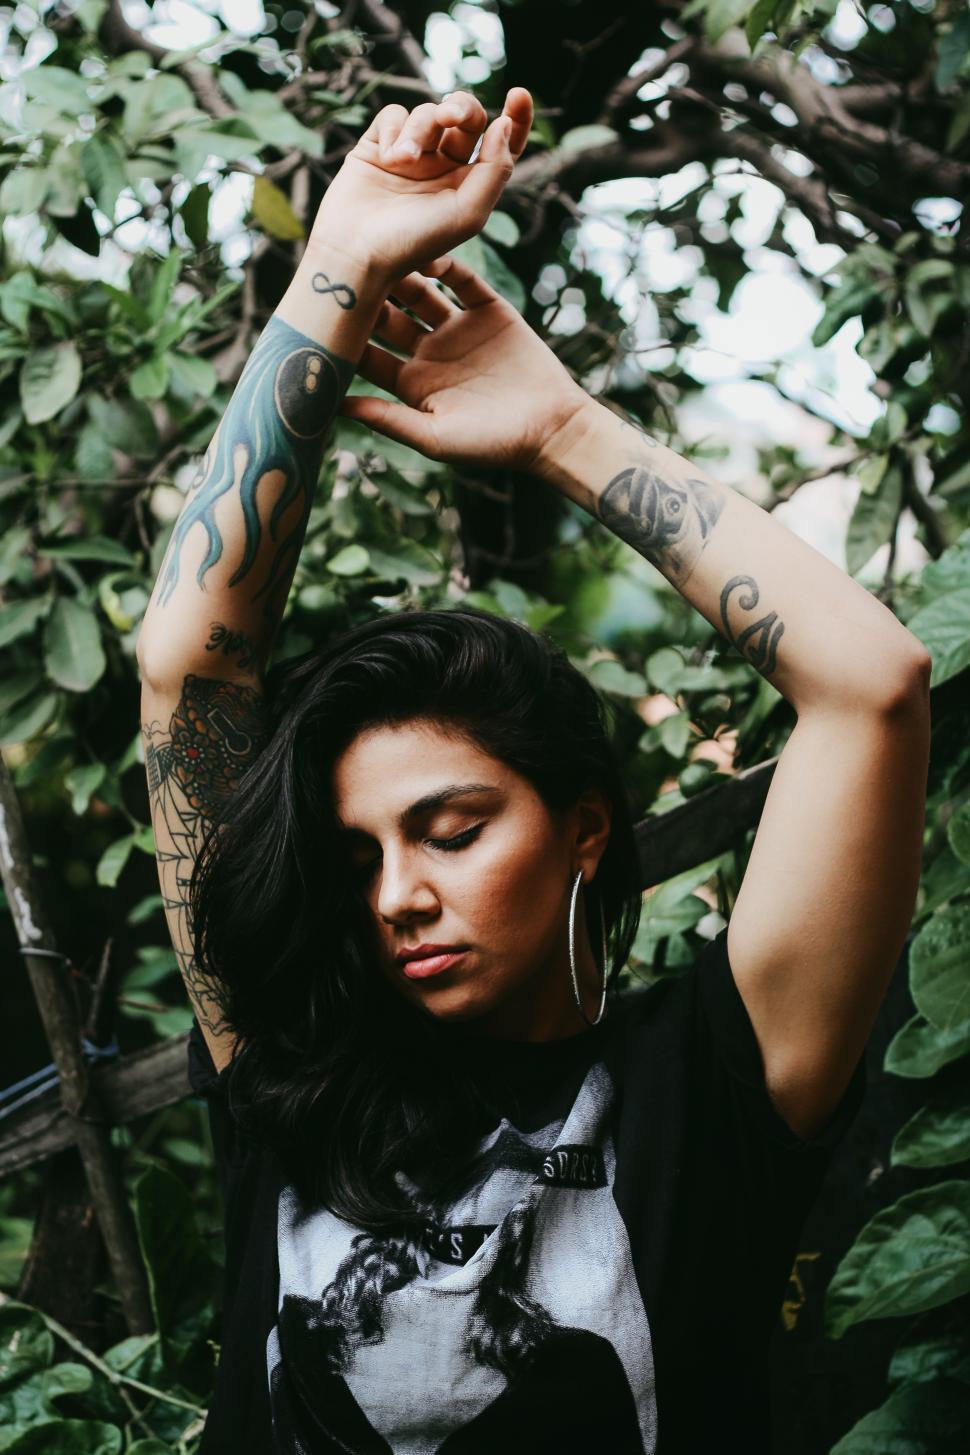 Free Image of Urban woman standing in the park with tattoos on hands 